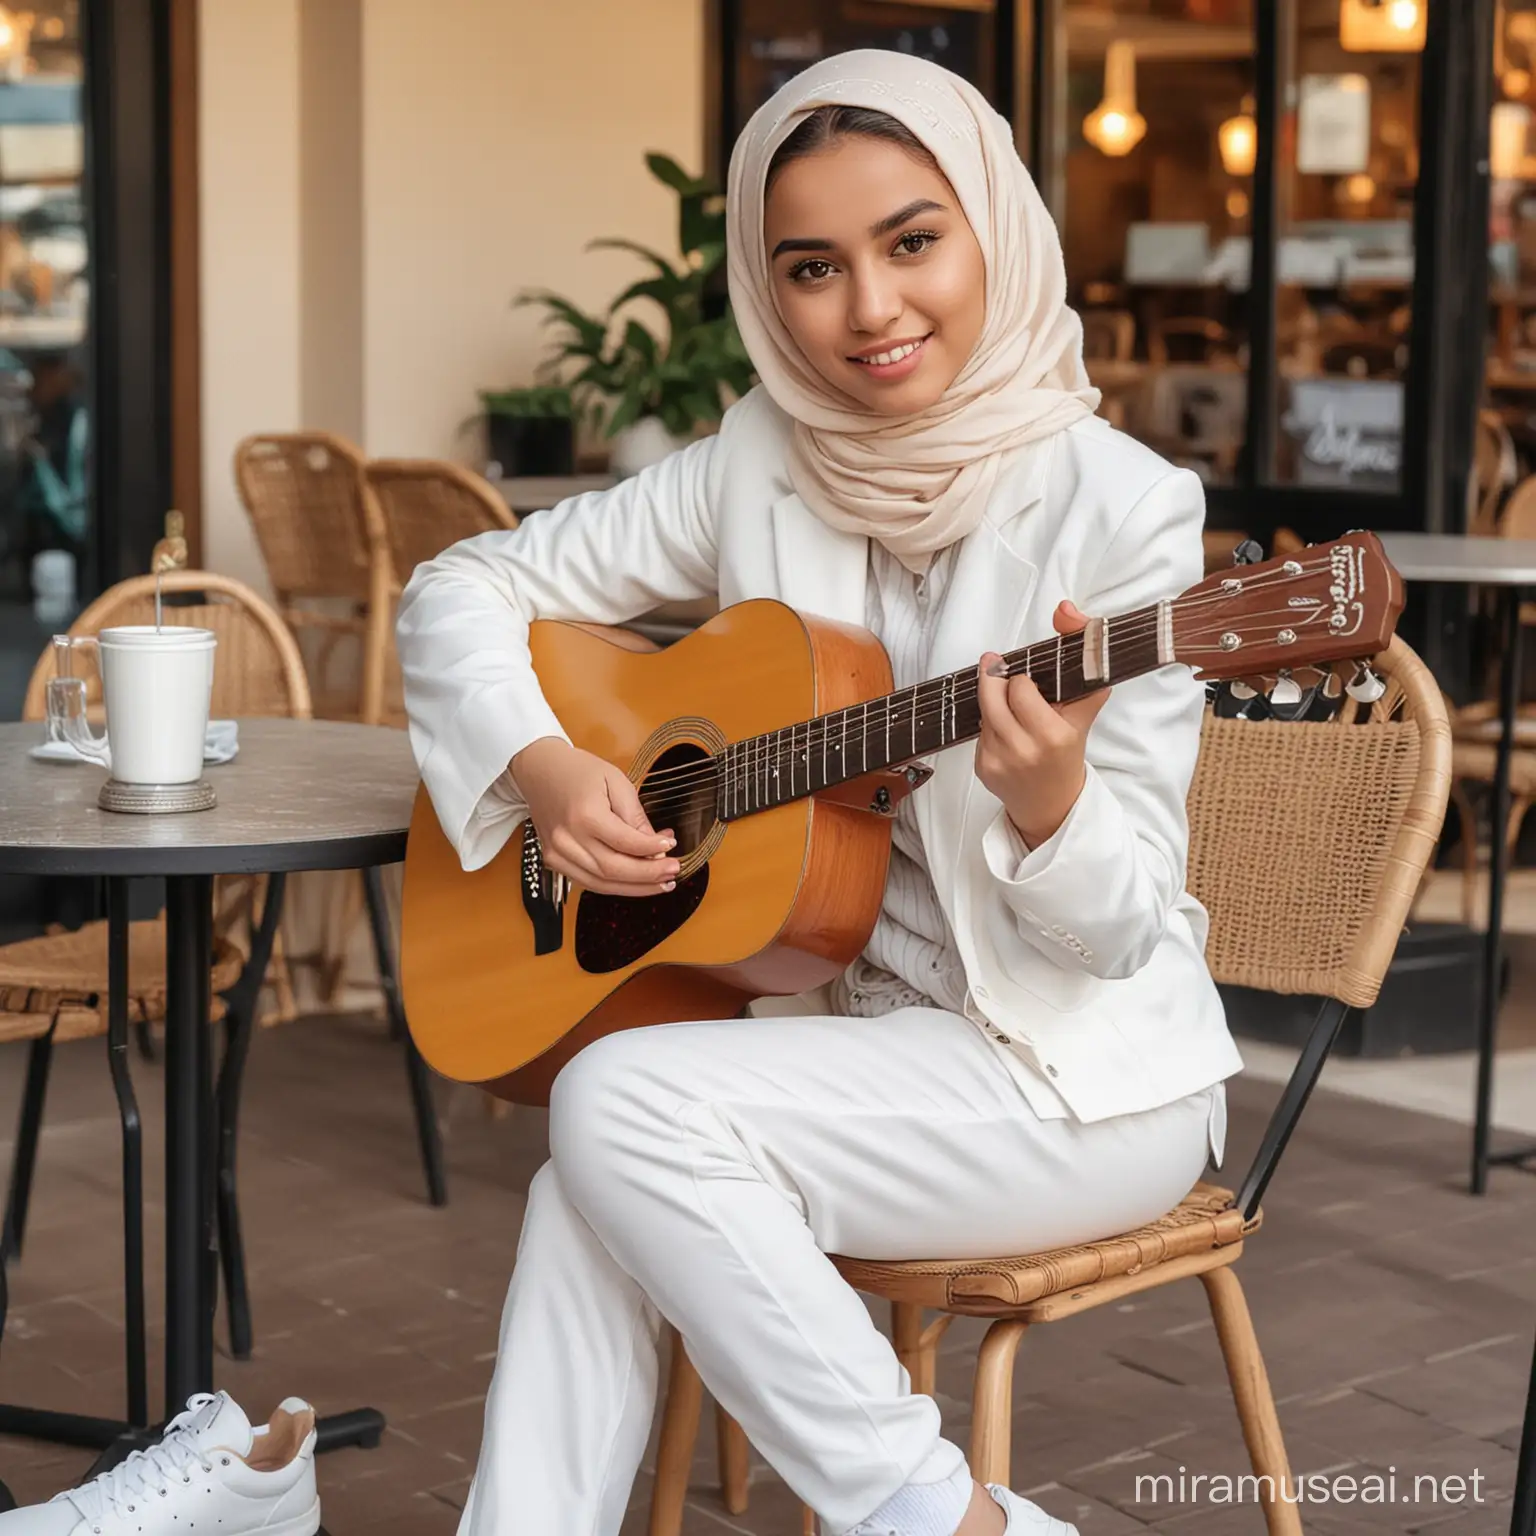 

photograpy of a beautiful girl wearing  hijab and white jacket with the name "ANNA", white trousers, white sneakers, sitting on a chair in a cafe. The girl is holding a guitar as if strumming. Face facing the camera. Cafe background,